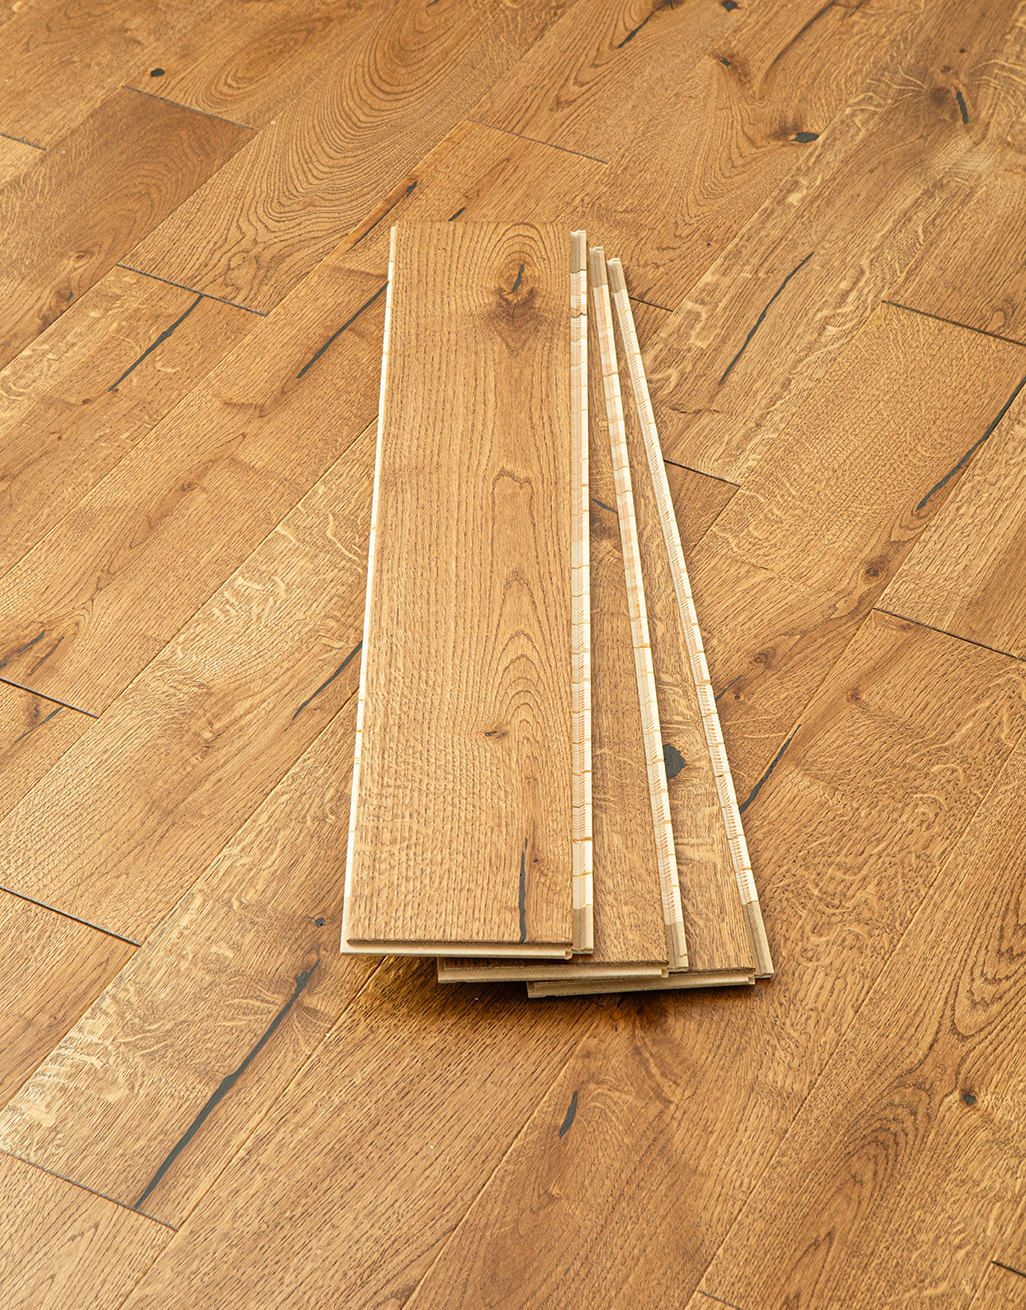 Carpenters Choice 130mm - Toffee Oak Lacquered Engineered Wood Flooring 3